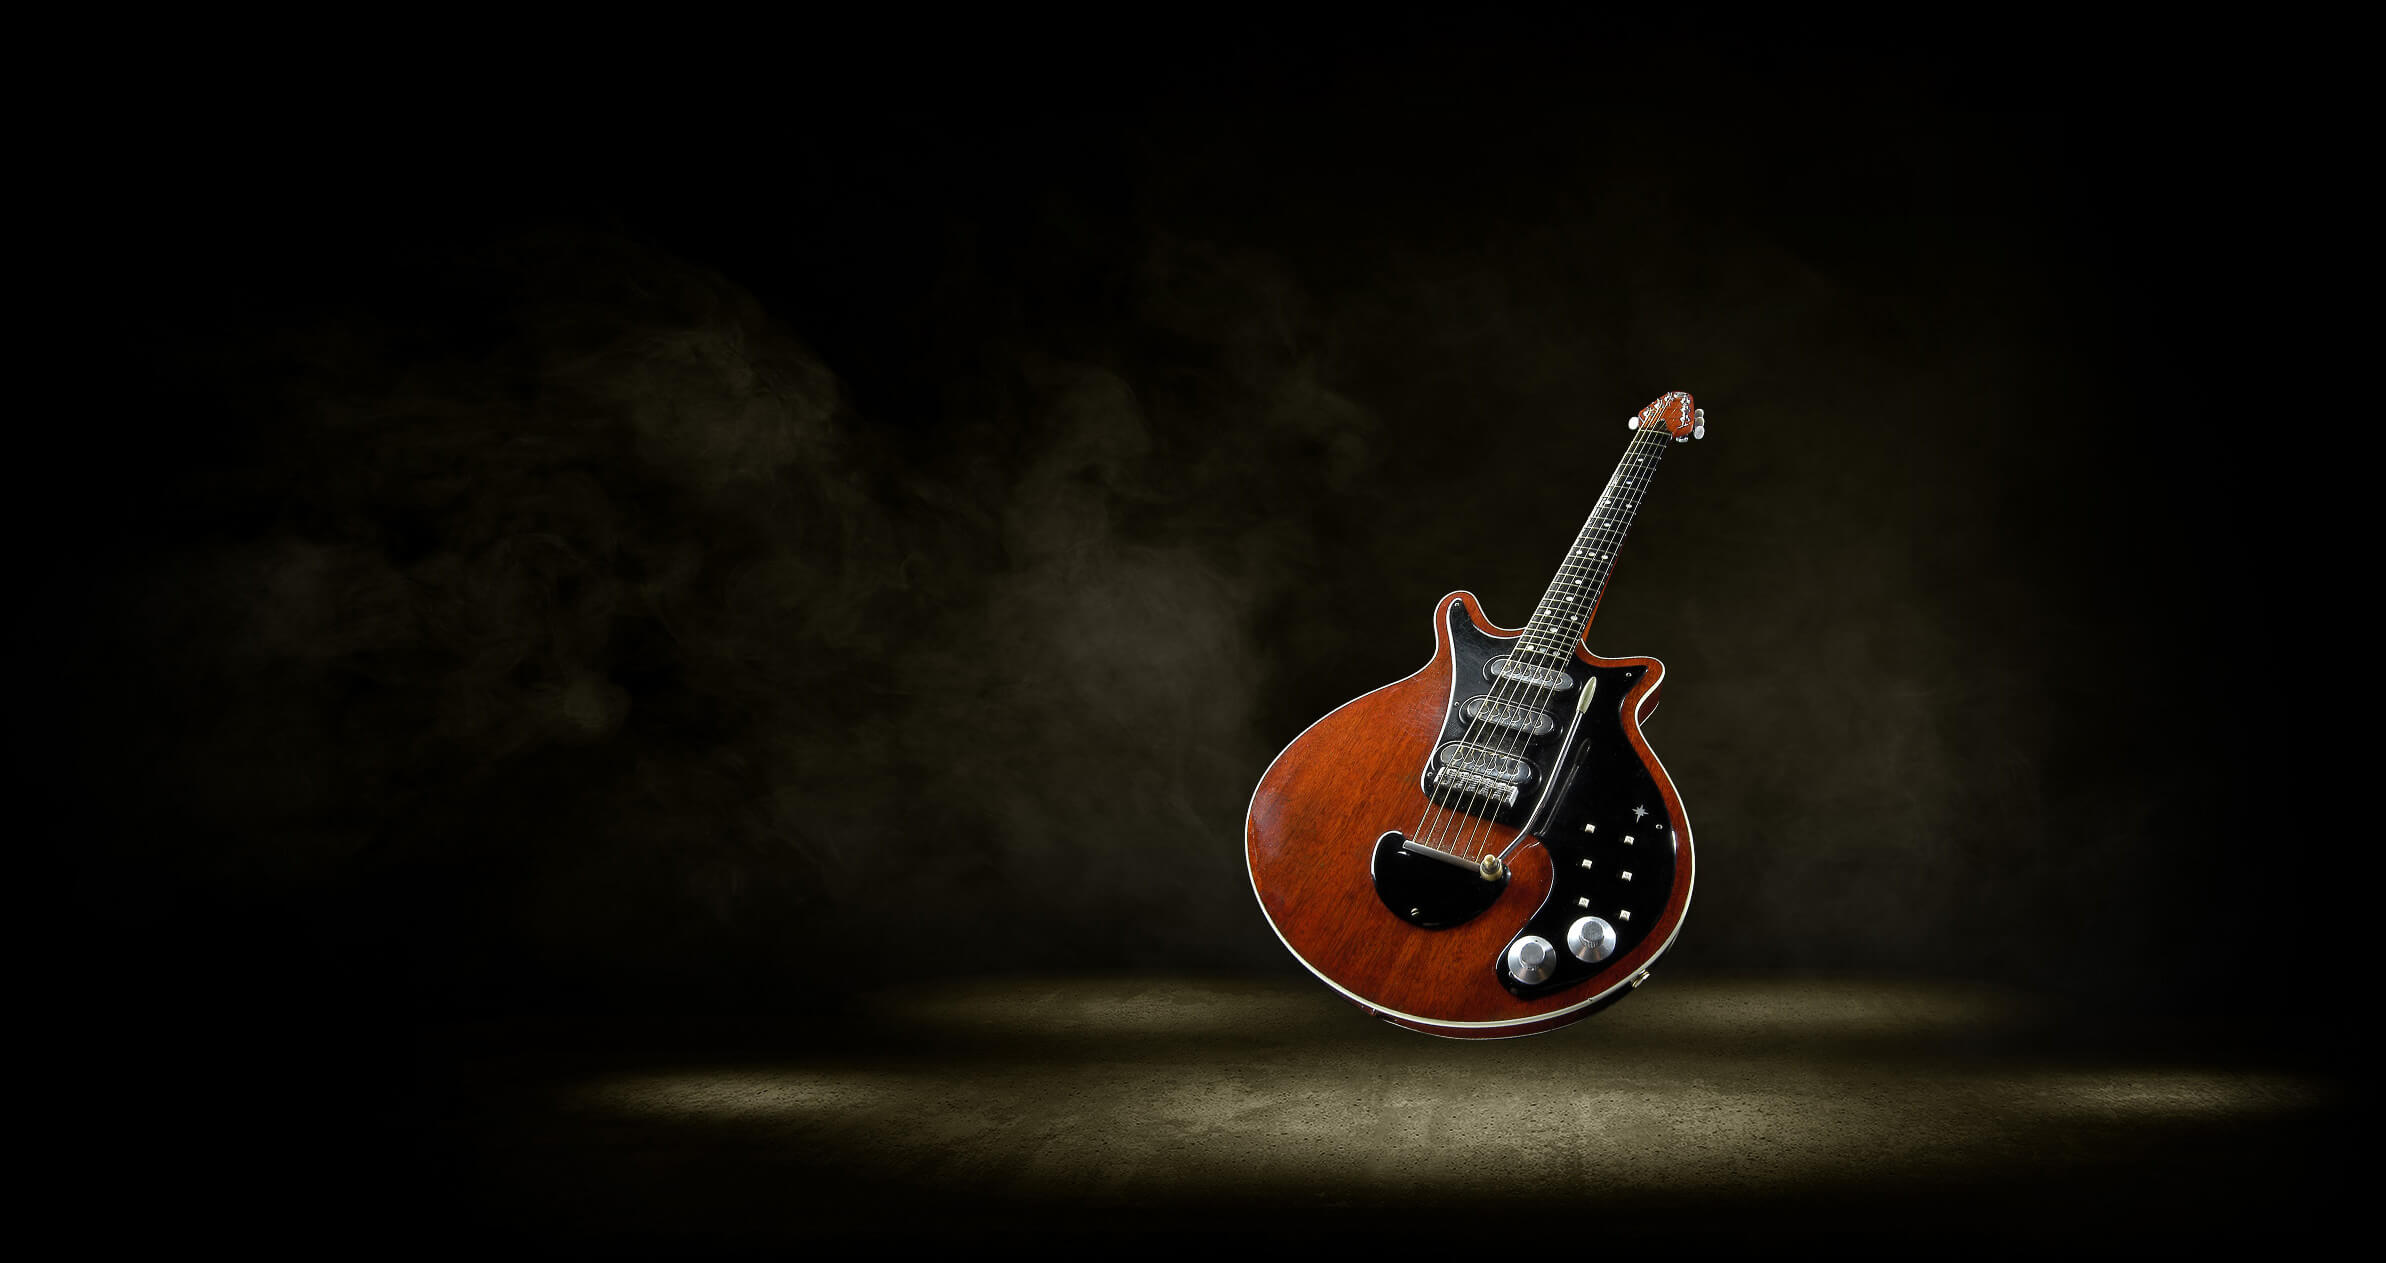 Photo of The "Red Special" guitar